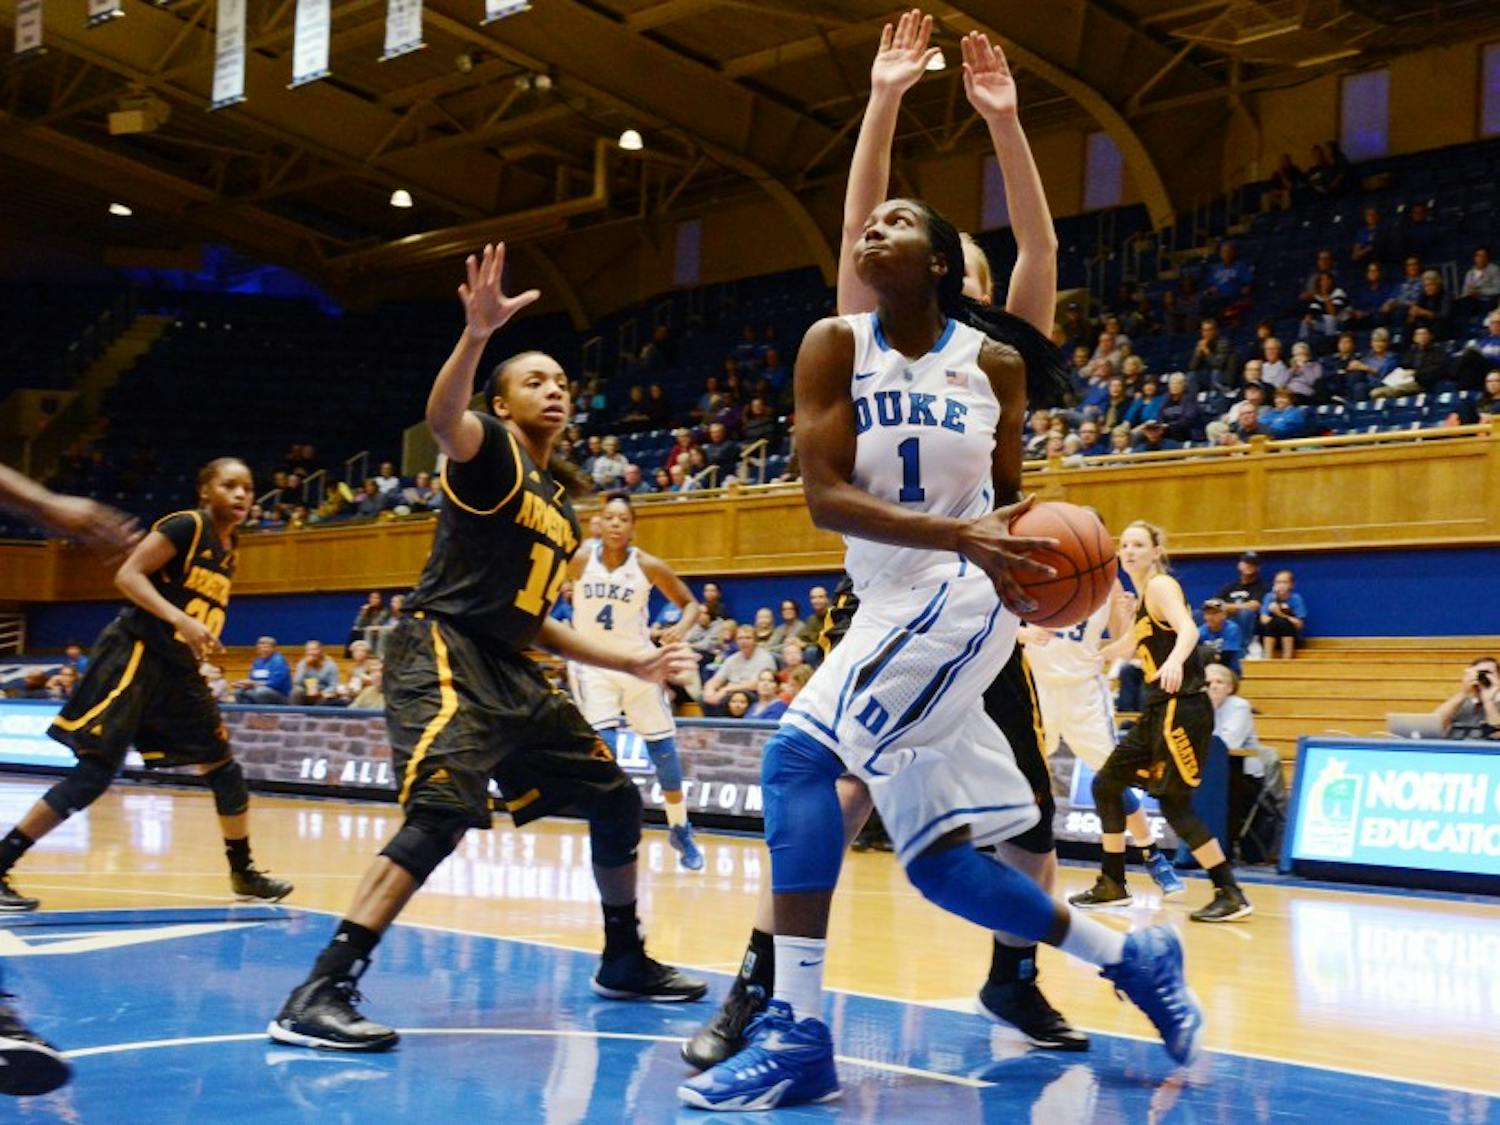 Senior center Elizabeth Williams posted 23 points and 18 rebounds in Sunday's exhibition against Armstrong State.